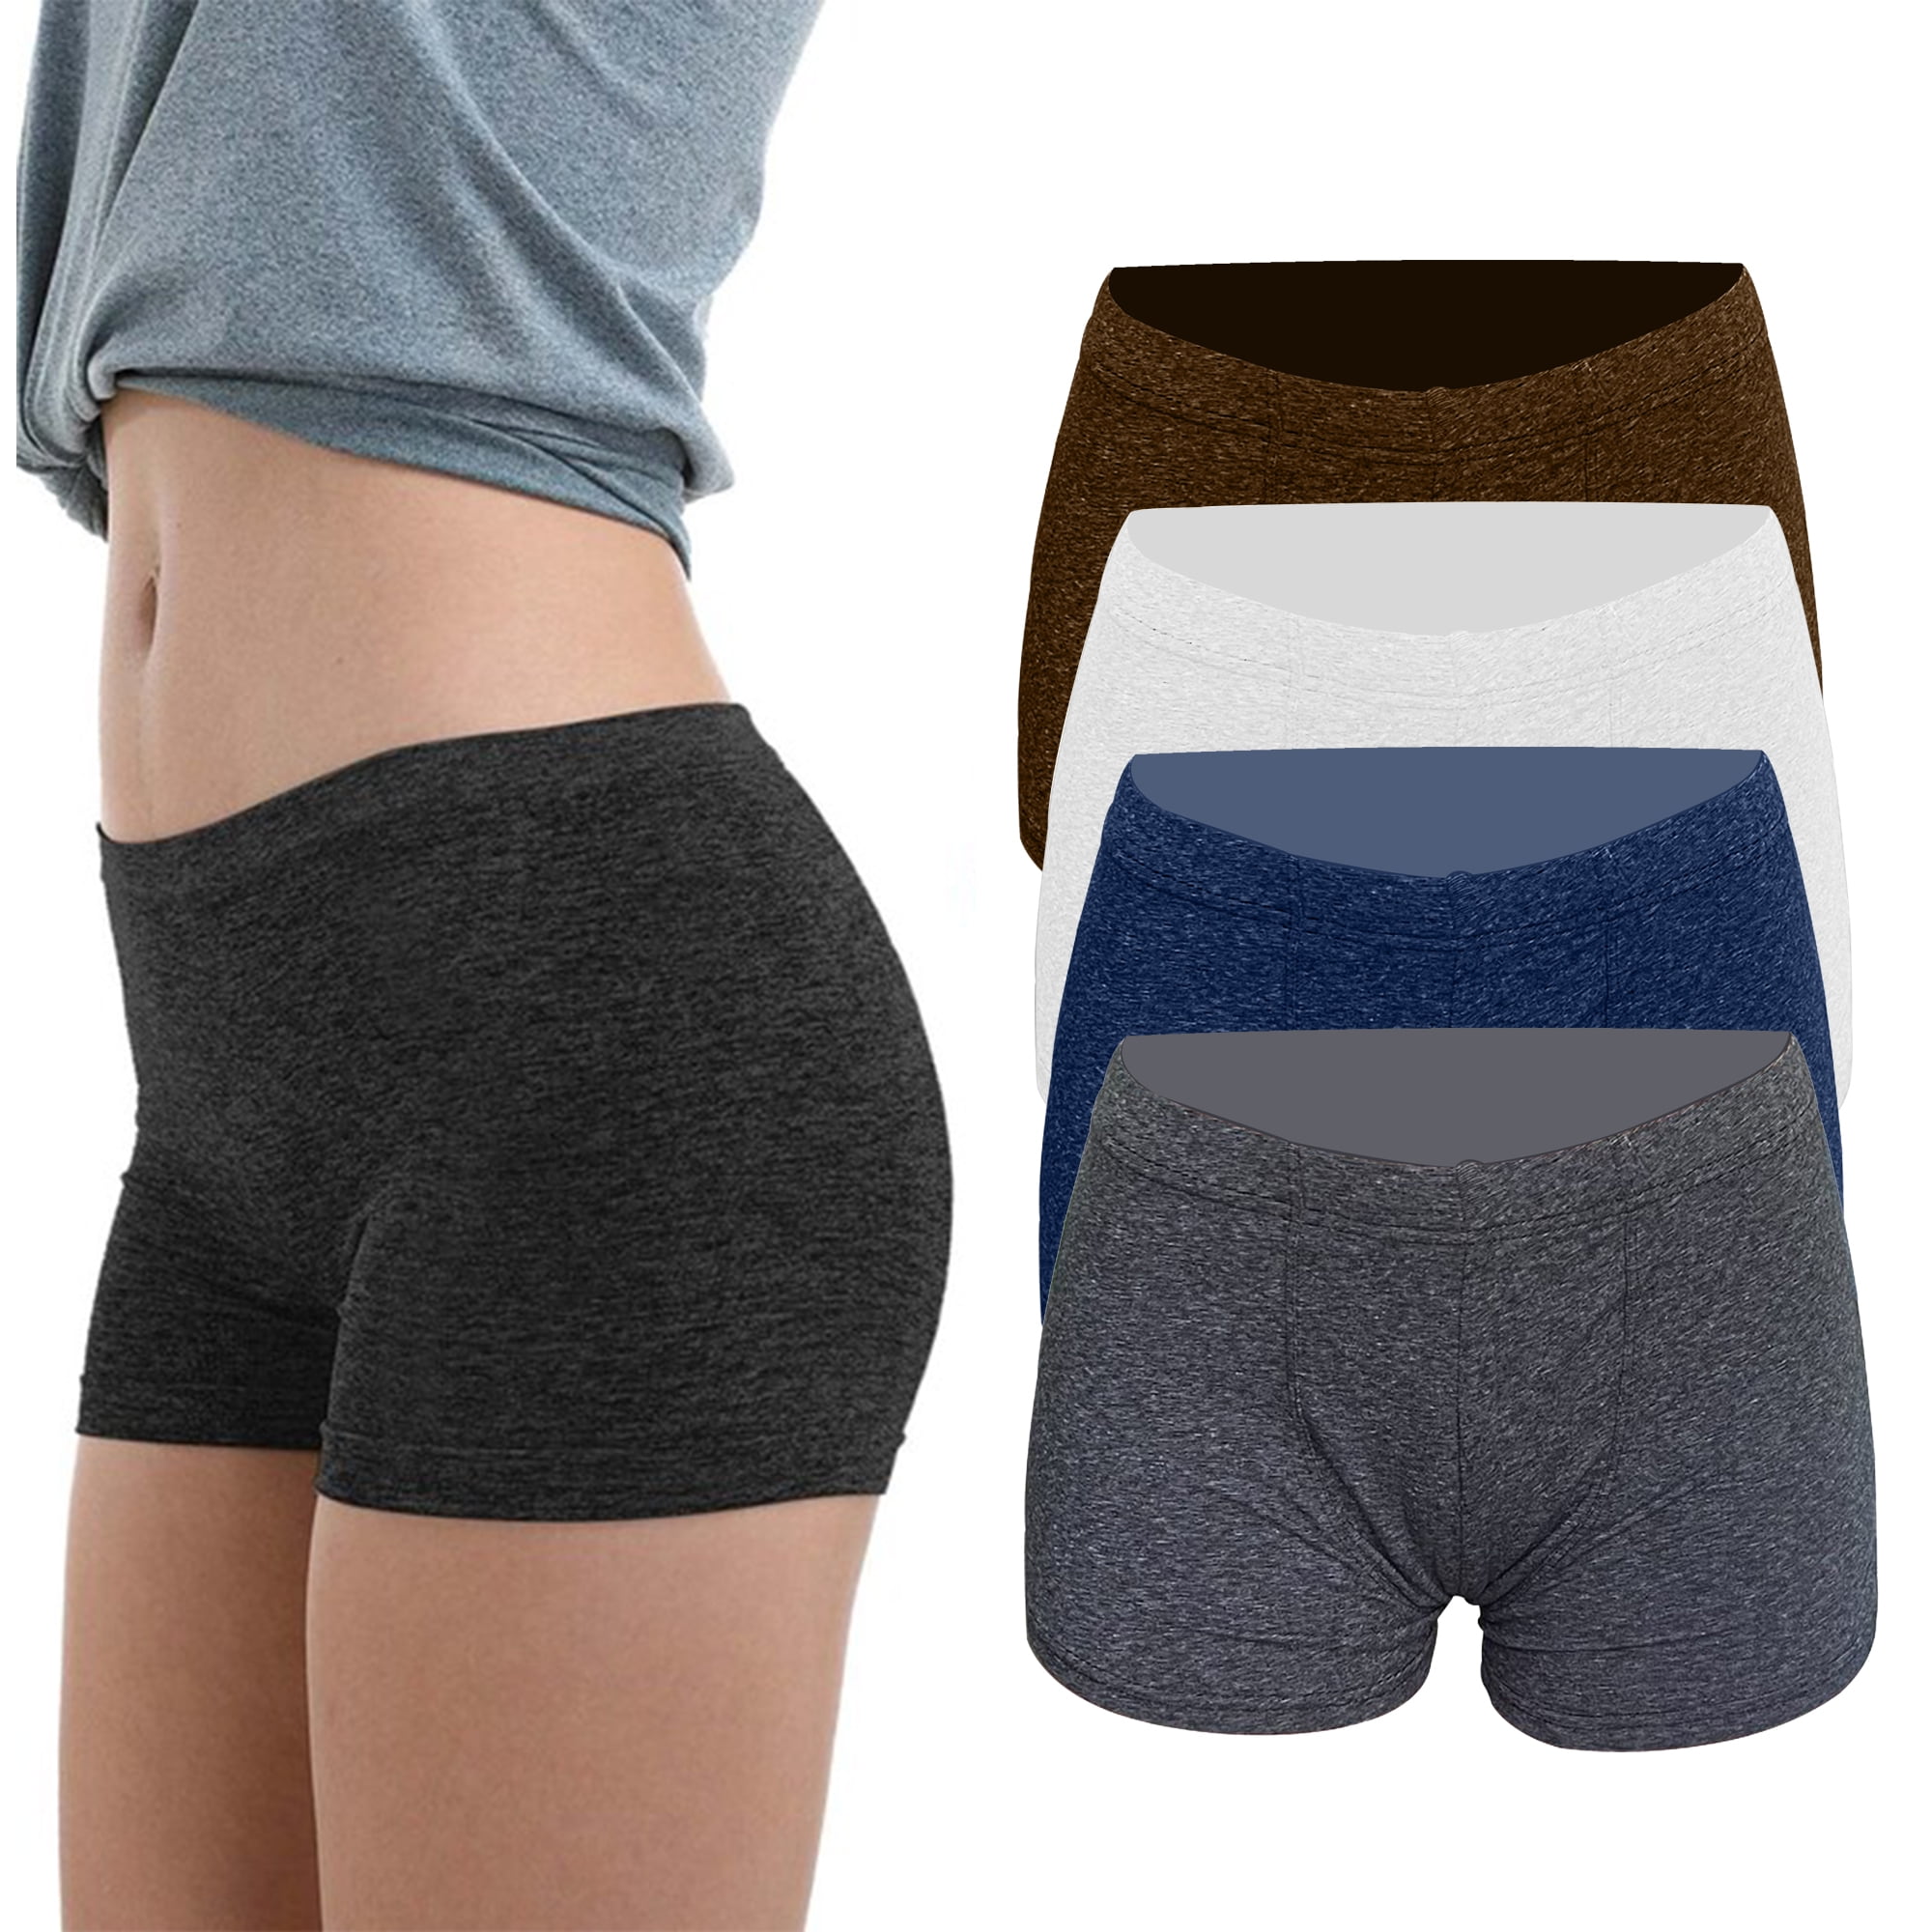 2 Pack Cute Boyshorts Underwear for women, Stretchy Fashionable Ladies  Panty, Low-rise Sexy Seamless Cotton Lace No-show boyshorts panties, Sporty High-quality Tagless Assorted underwear